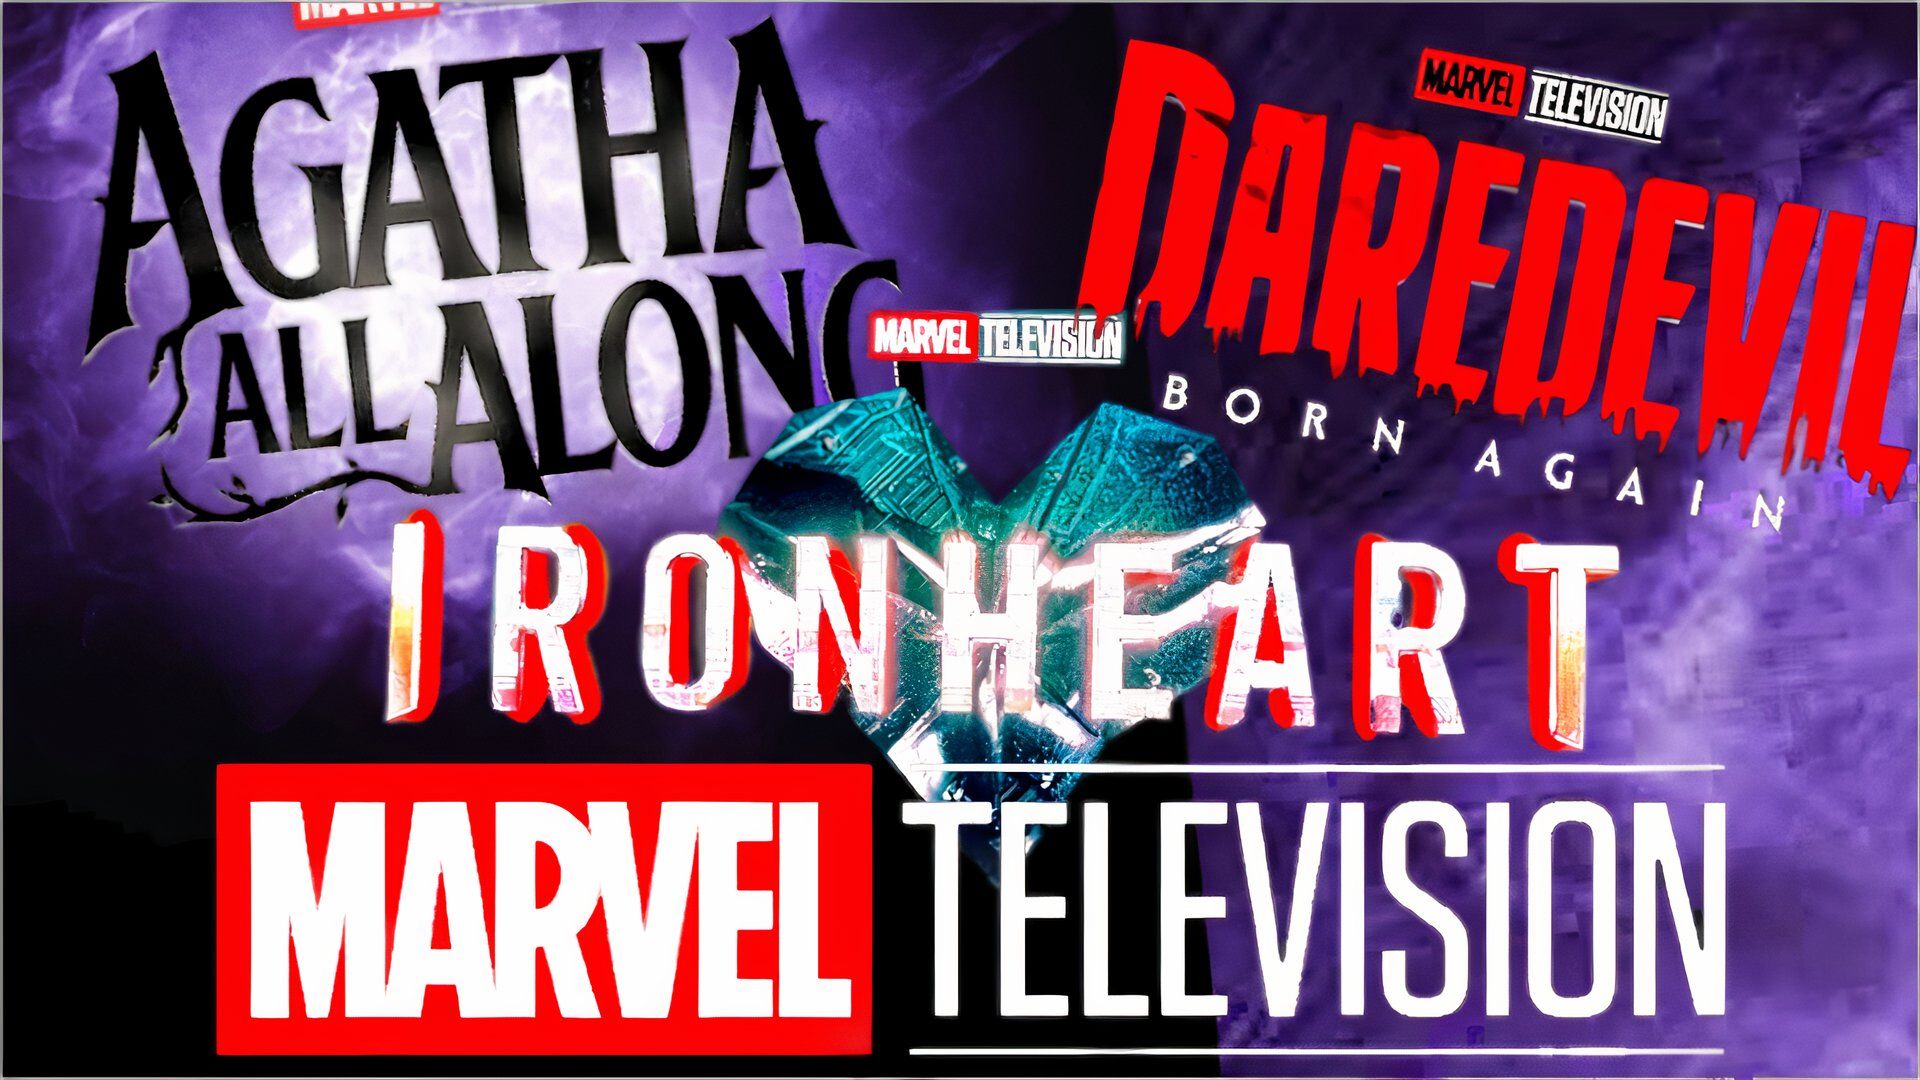 Marvel Television banner with Agatha, Daredevil and Ironheart logos